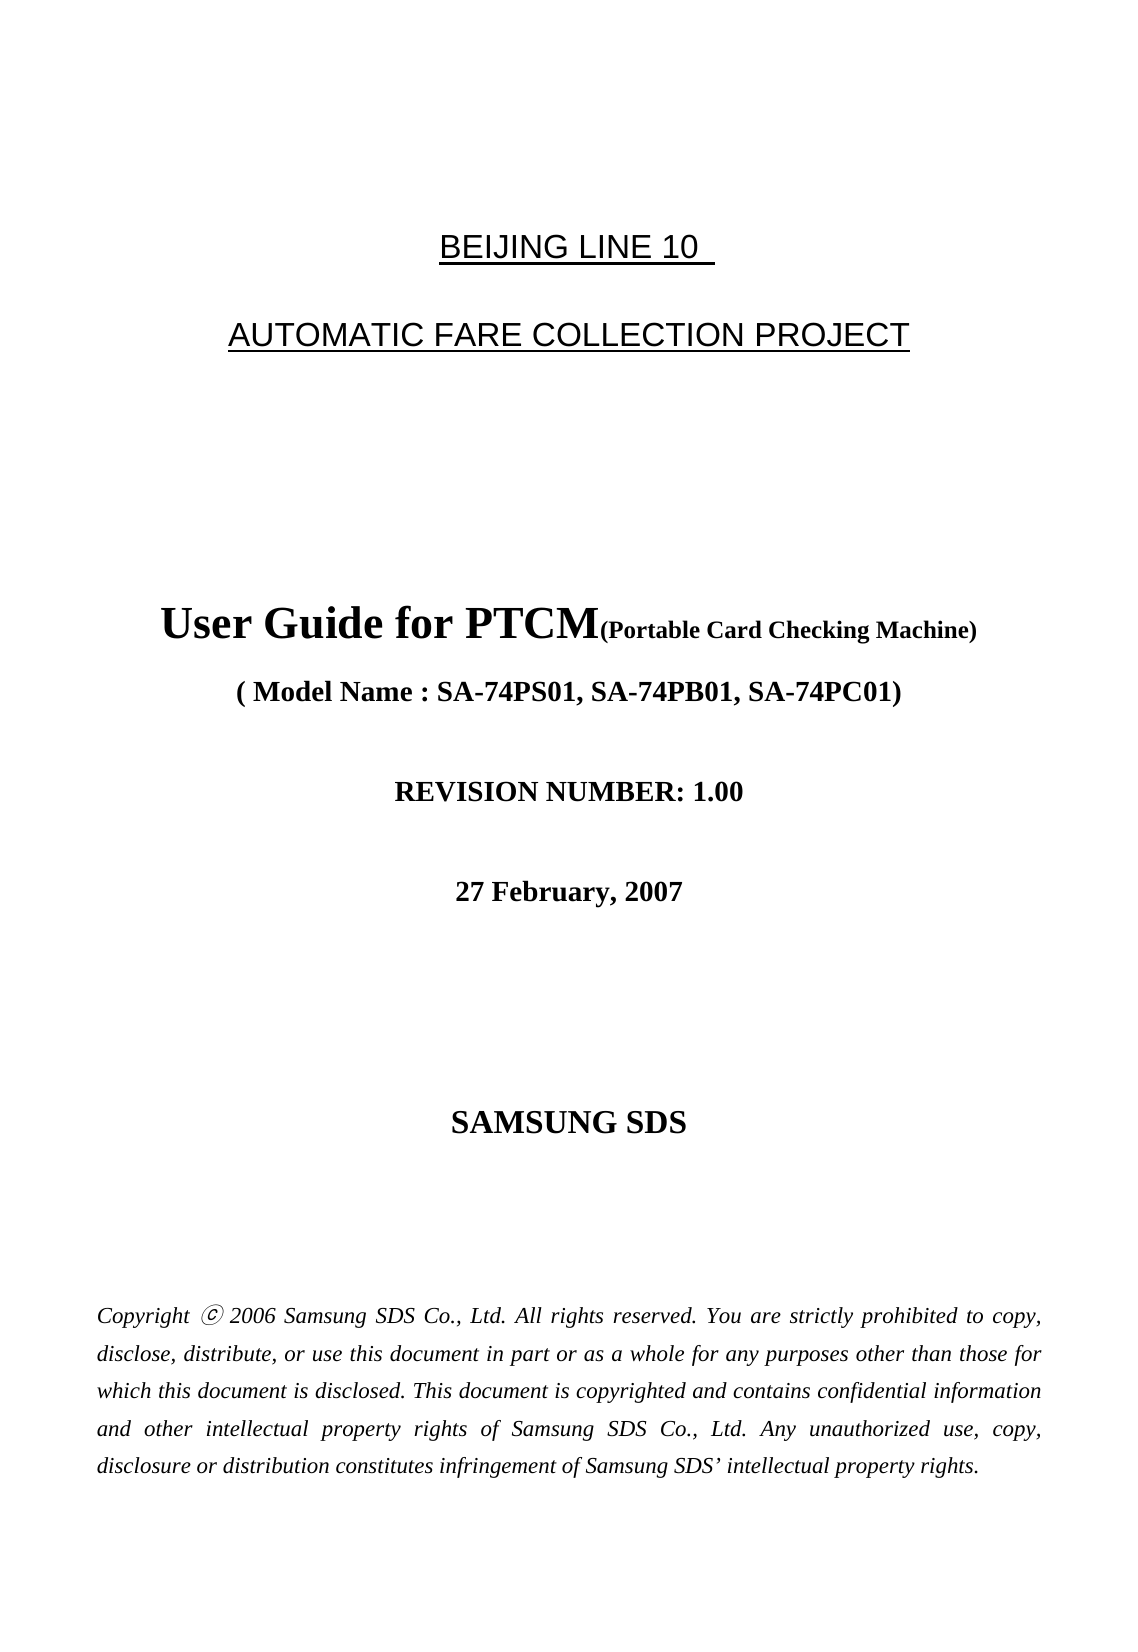   BEIJING LINE 10   AUTOMATIC FARE COLLECTION PROJECT     User Guide for PTCM(Portable Card Checking Machine) ( Model Name : SA-74PS01, SA-74PB01, SA-74PC01)  REVISION NUMBER: 1.00  27 February, 2007     SAMSUNG SDS    Copyright ⓒ 2006 Samsung SDS Co., Ltd. All rights reserved. You are strictly prohibited to copy, disclose, distribute, or use this document in part or as a whole for any purposes other than those for which this document is disclosed. This document is copyrighted and contains confidential information and other intellectual property rights of Samsung SDS Co., Ltd. Any unauthorized use, copy, disclosure or distribution constitutes infringement of Samsung SDS’ intellectual property rights. 